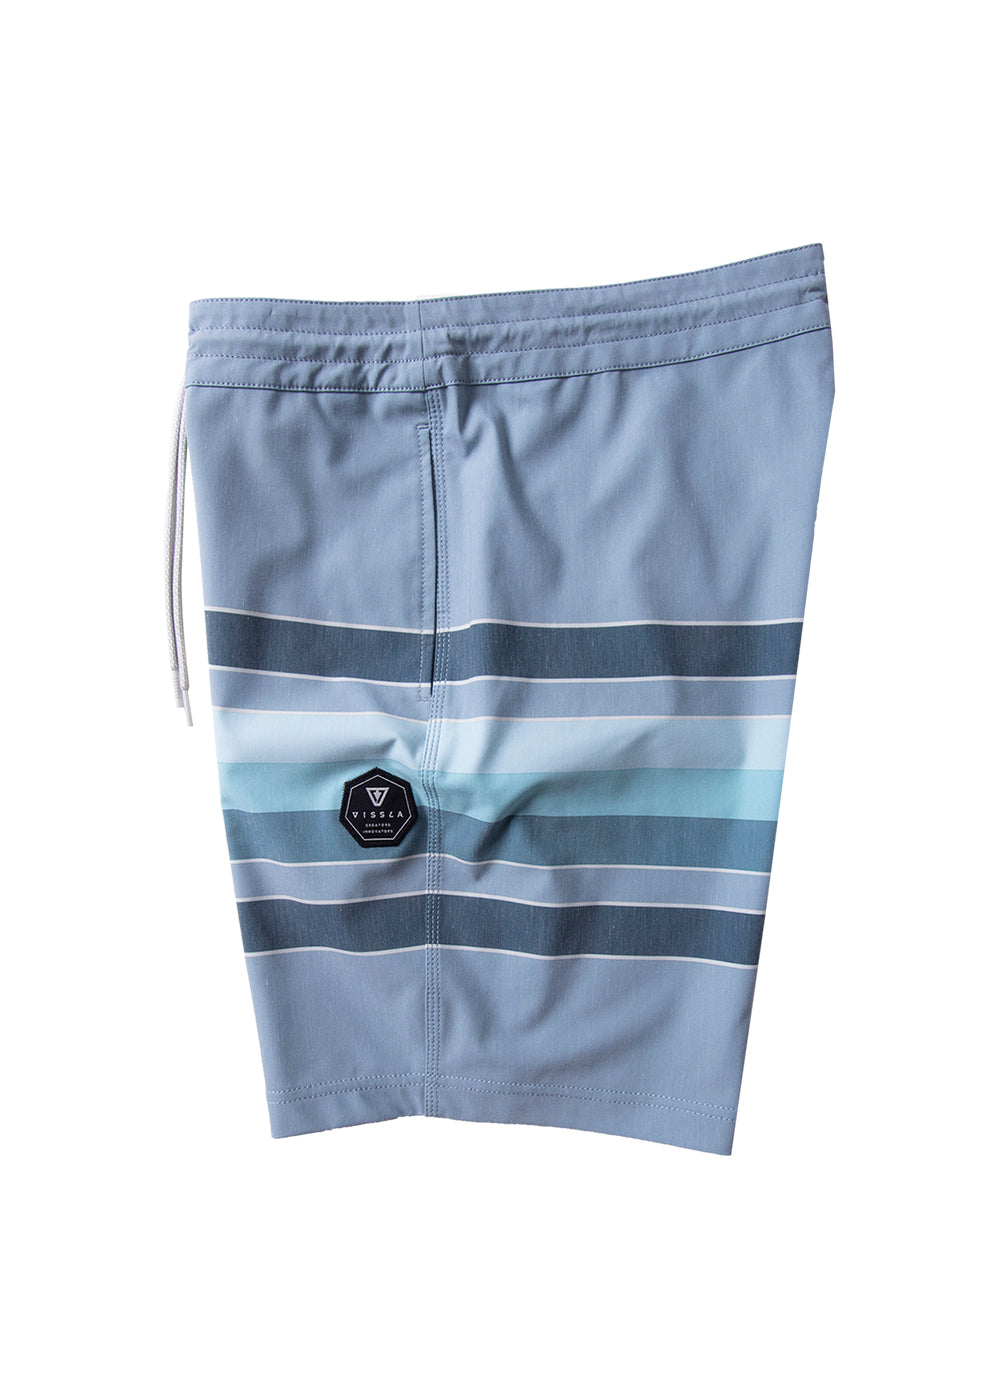 Vissla Men's Fist Bump 18.5" boardshort. Faded denim front view. Includes dark blue and light blue horizontal thick stripes. Side View 